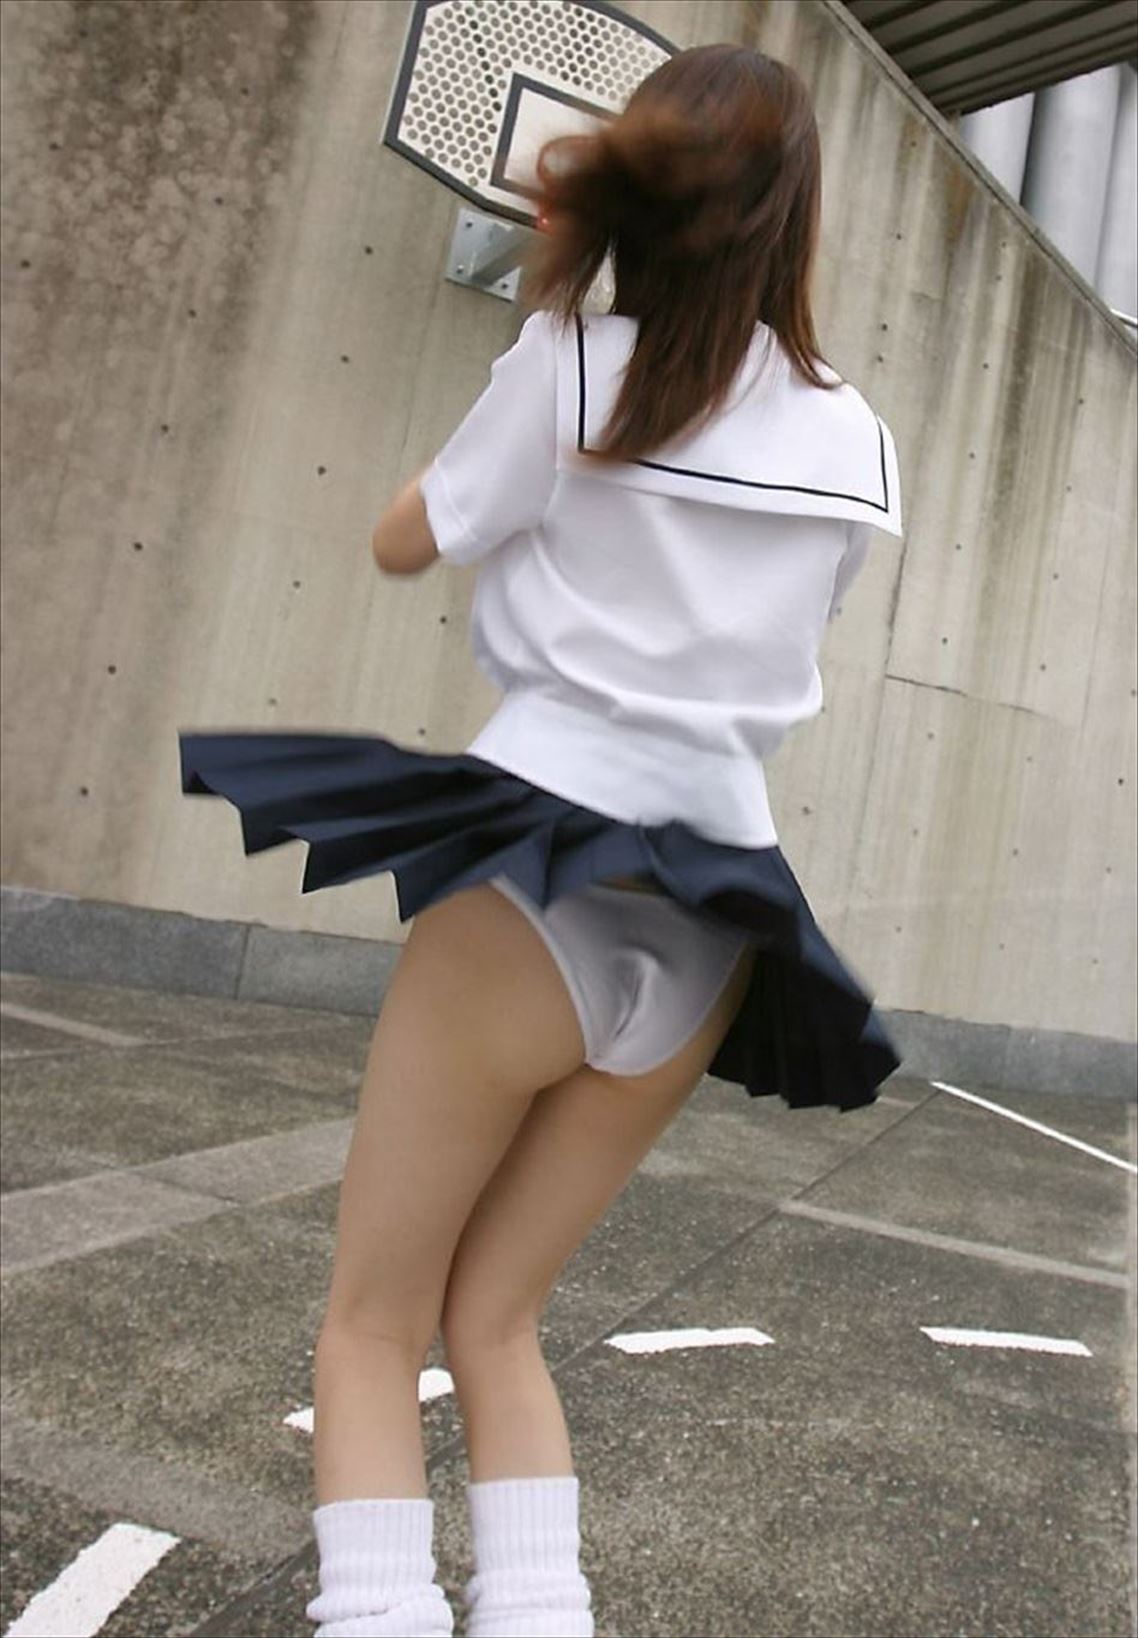 Japan upskirt with puppy